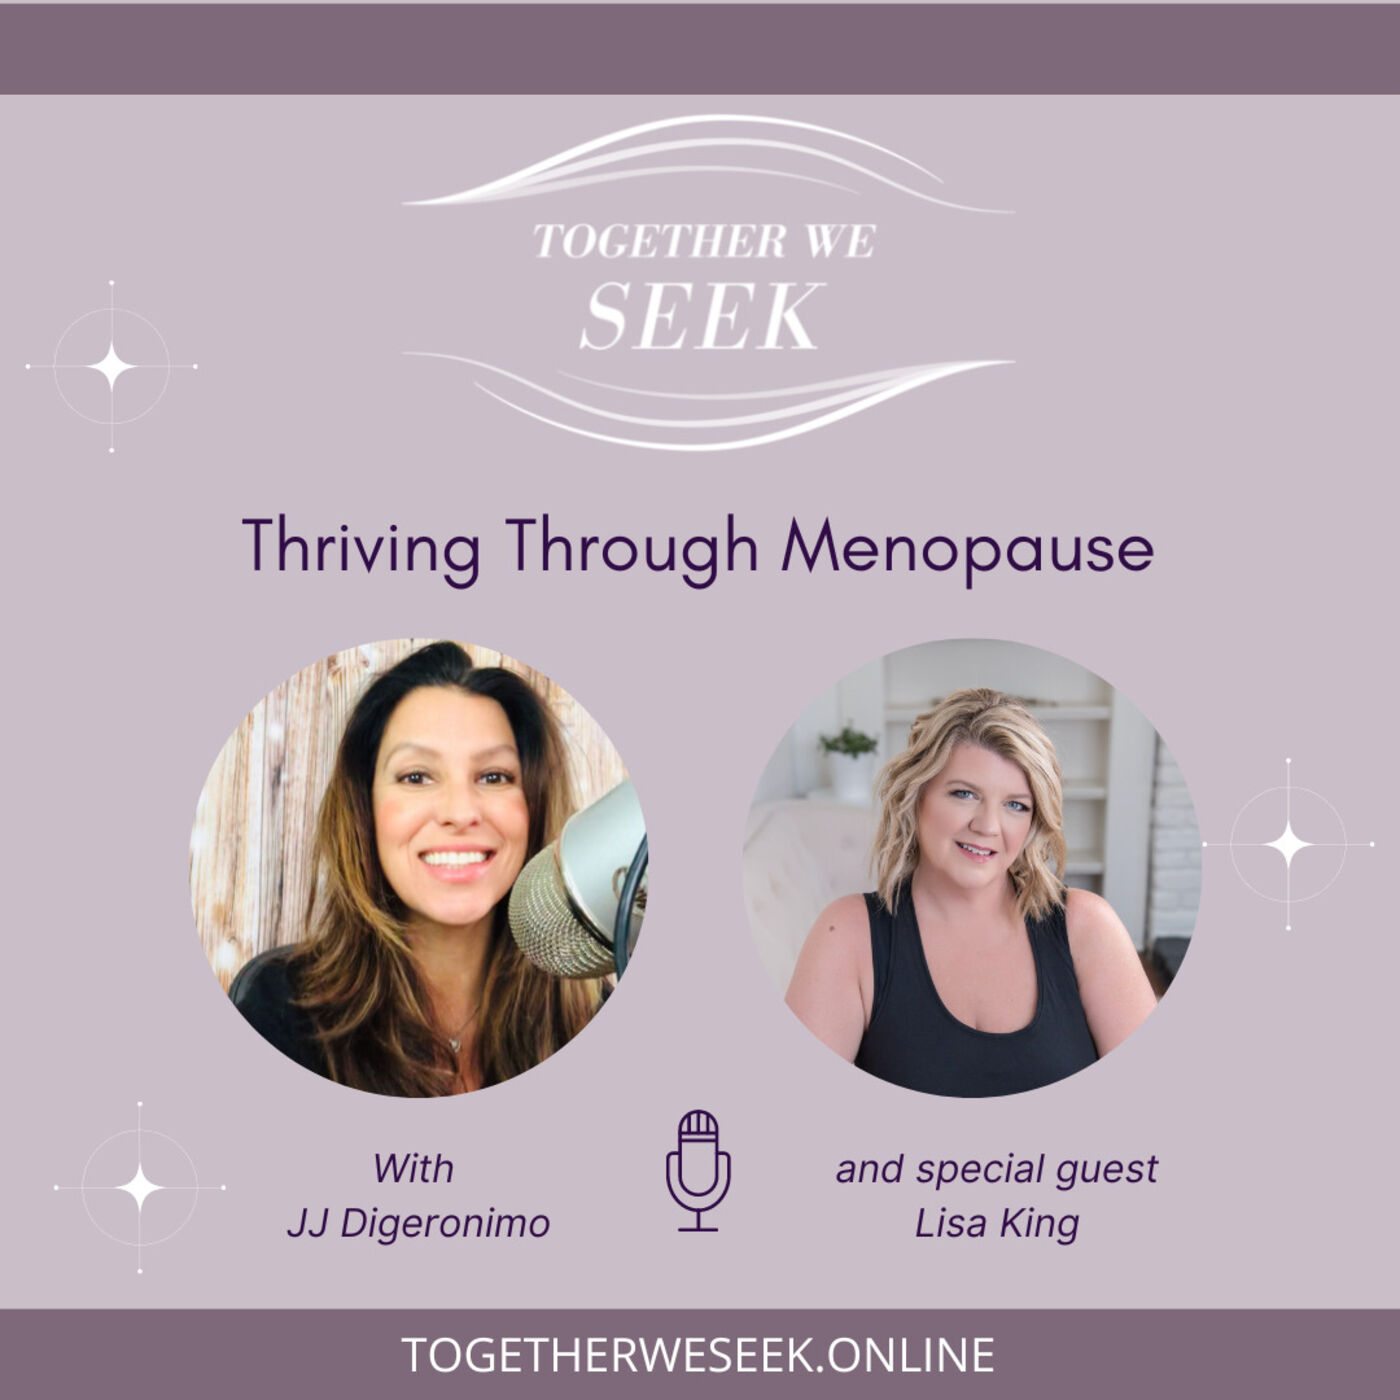 Thriving Through Menopause with Lisa King